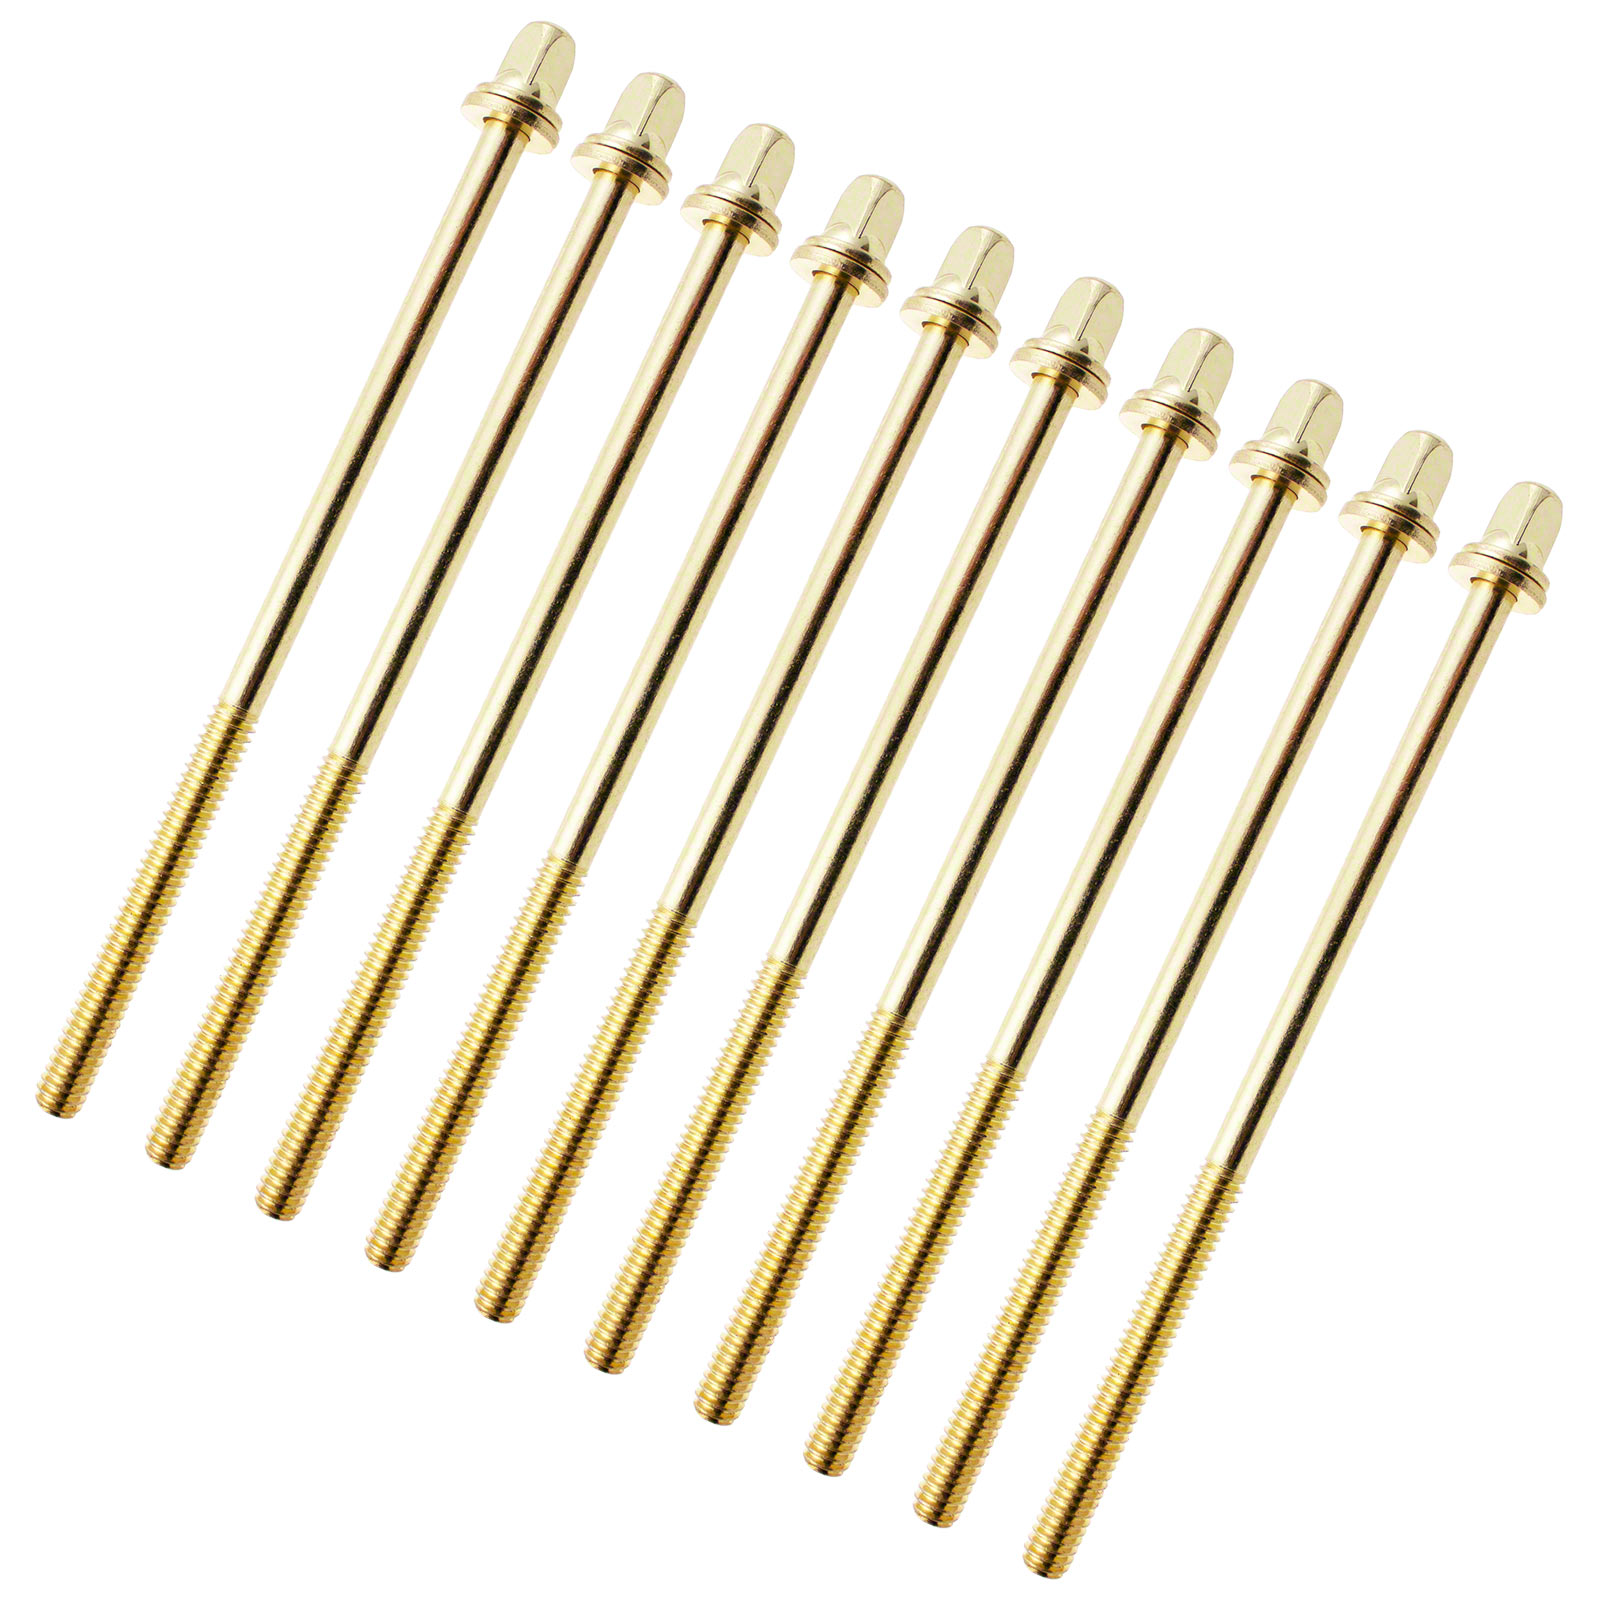 SPAREDRUM TRC-110W-BR - 110MM TENSION ROD BRASS WITH WASHER - 7/32